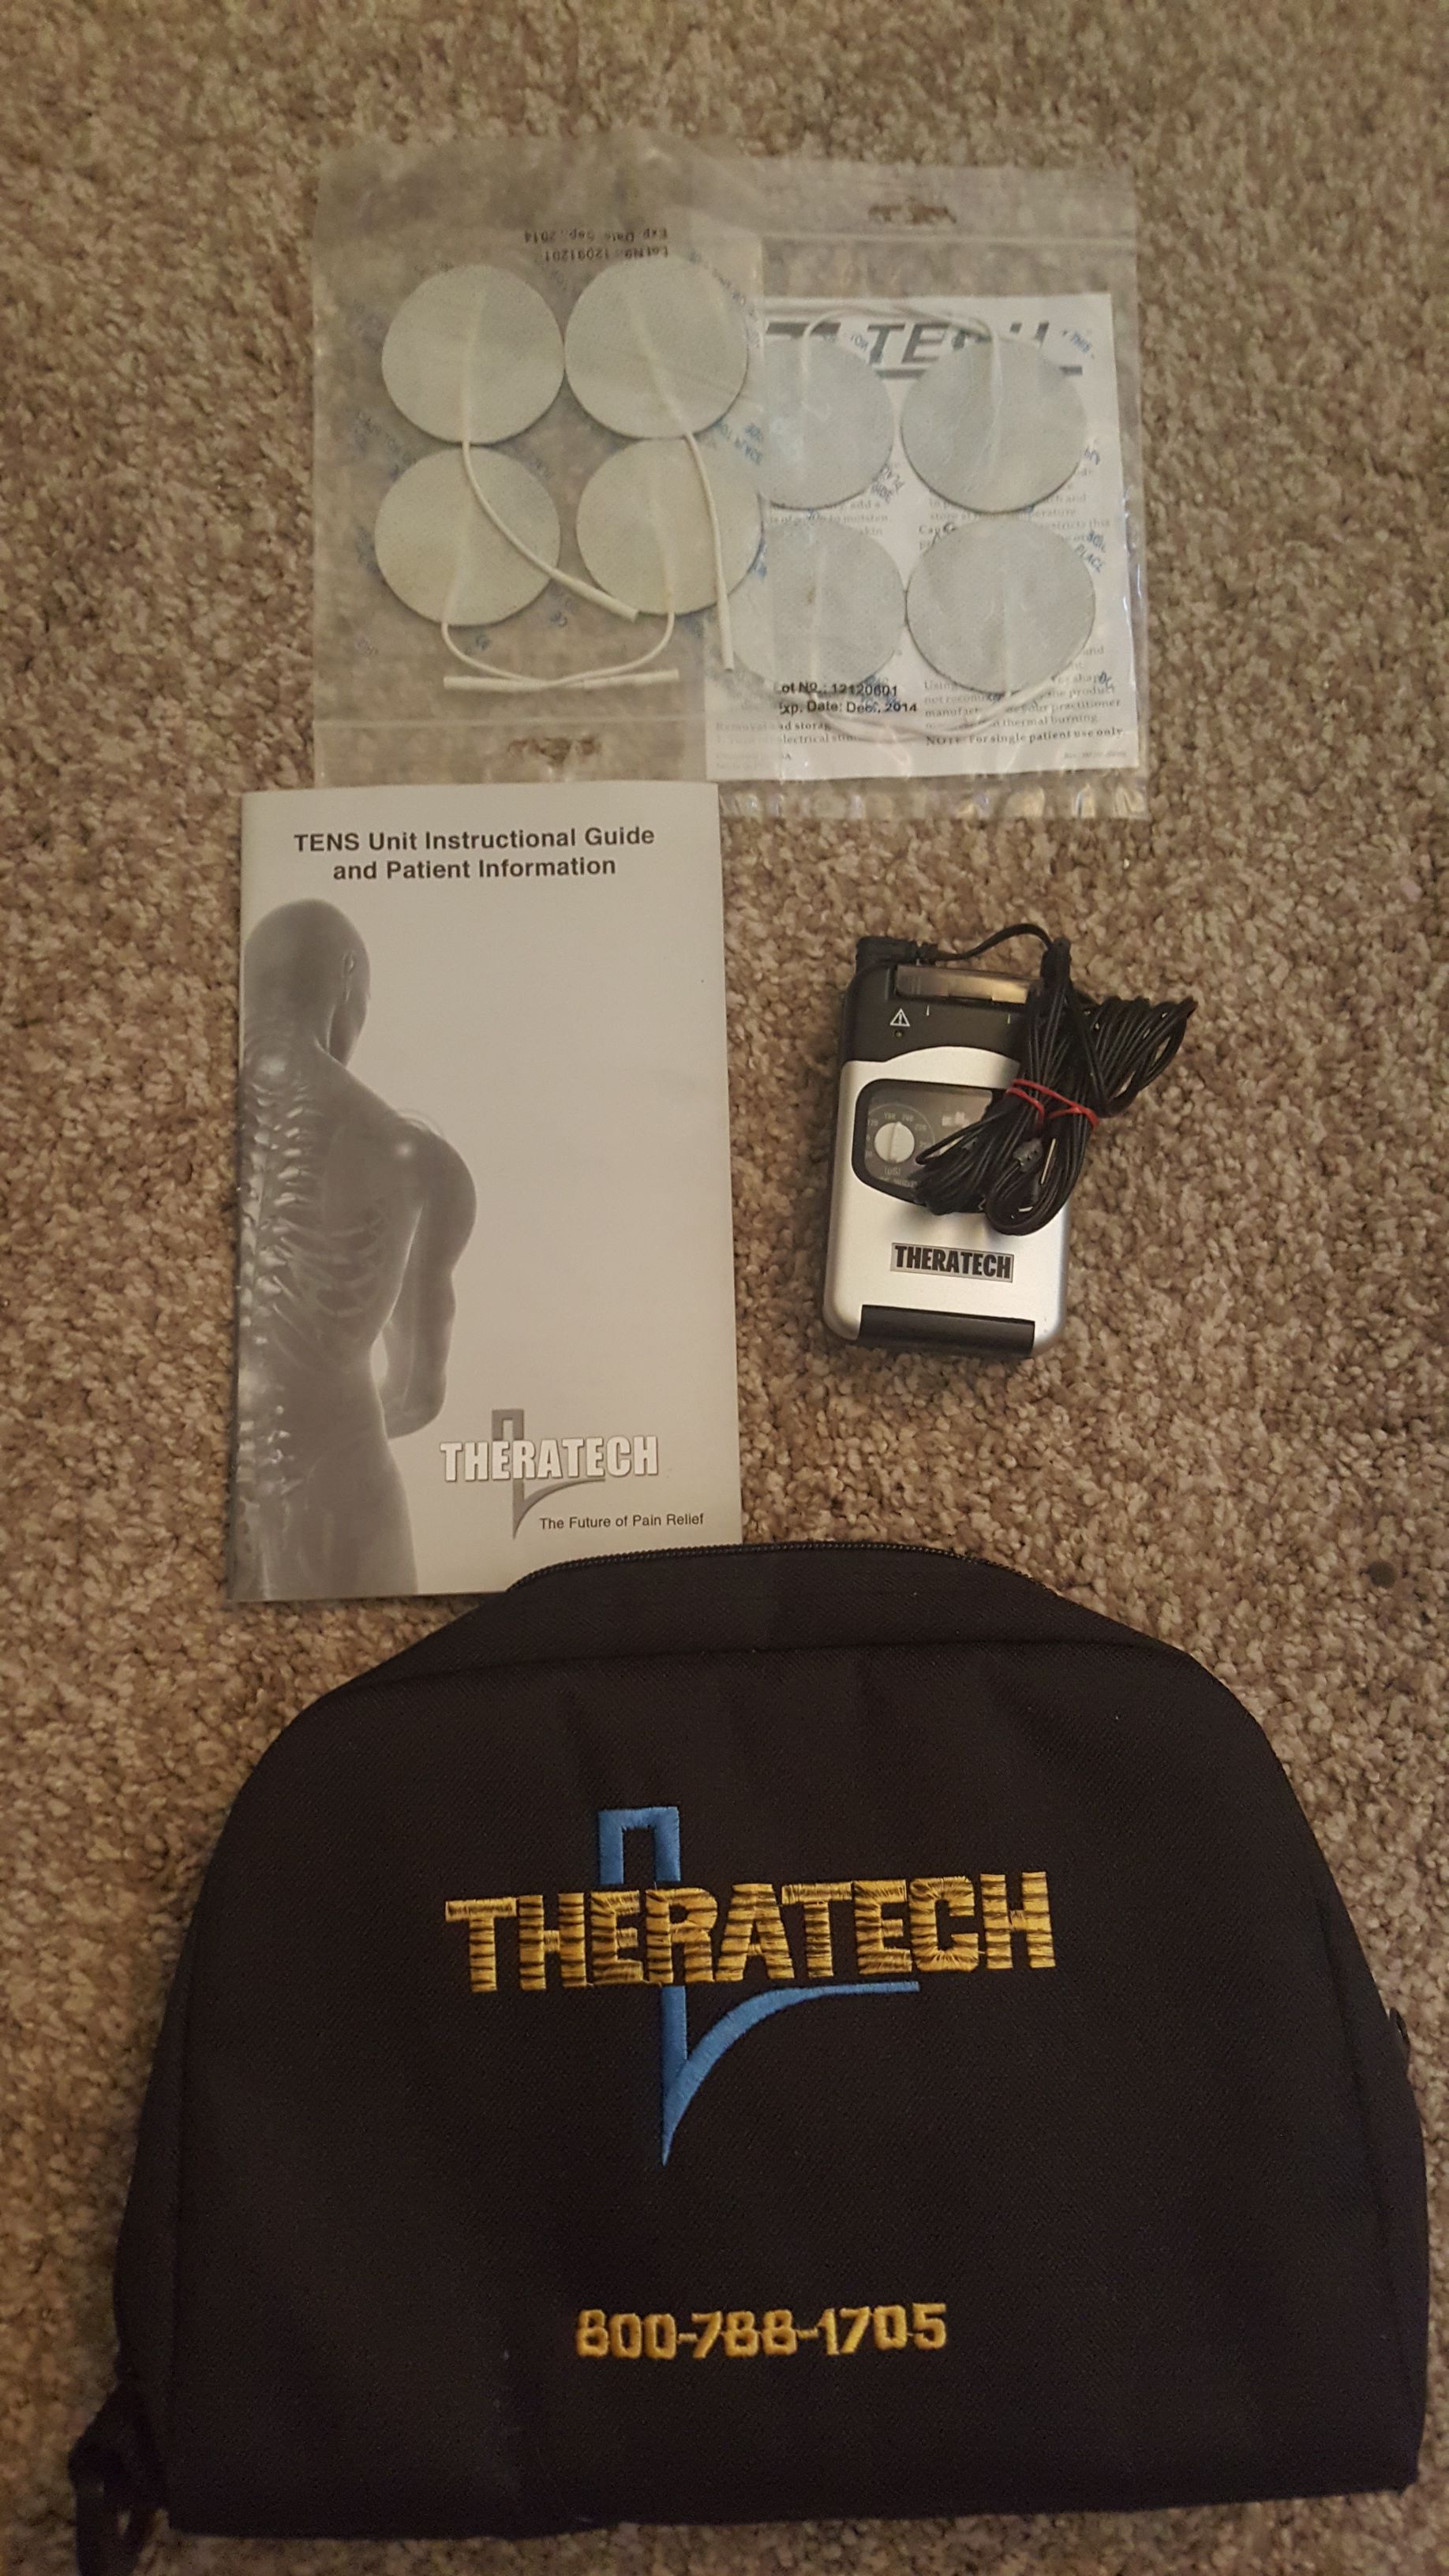 TENS 7000 Digital TENS Unit With Accessories - TENS Unit Muscle Stimulator  For Back Pain, General Pain Relief, Neck Pain, Muscle Pain for Sale in  Riverside, CA - OfferUp